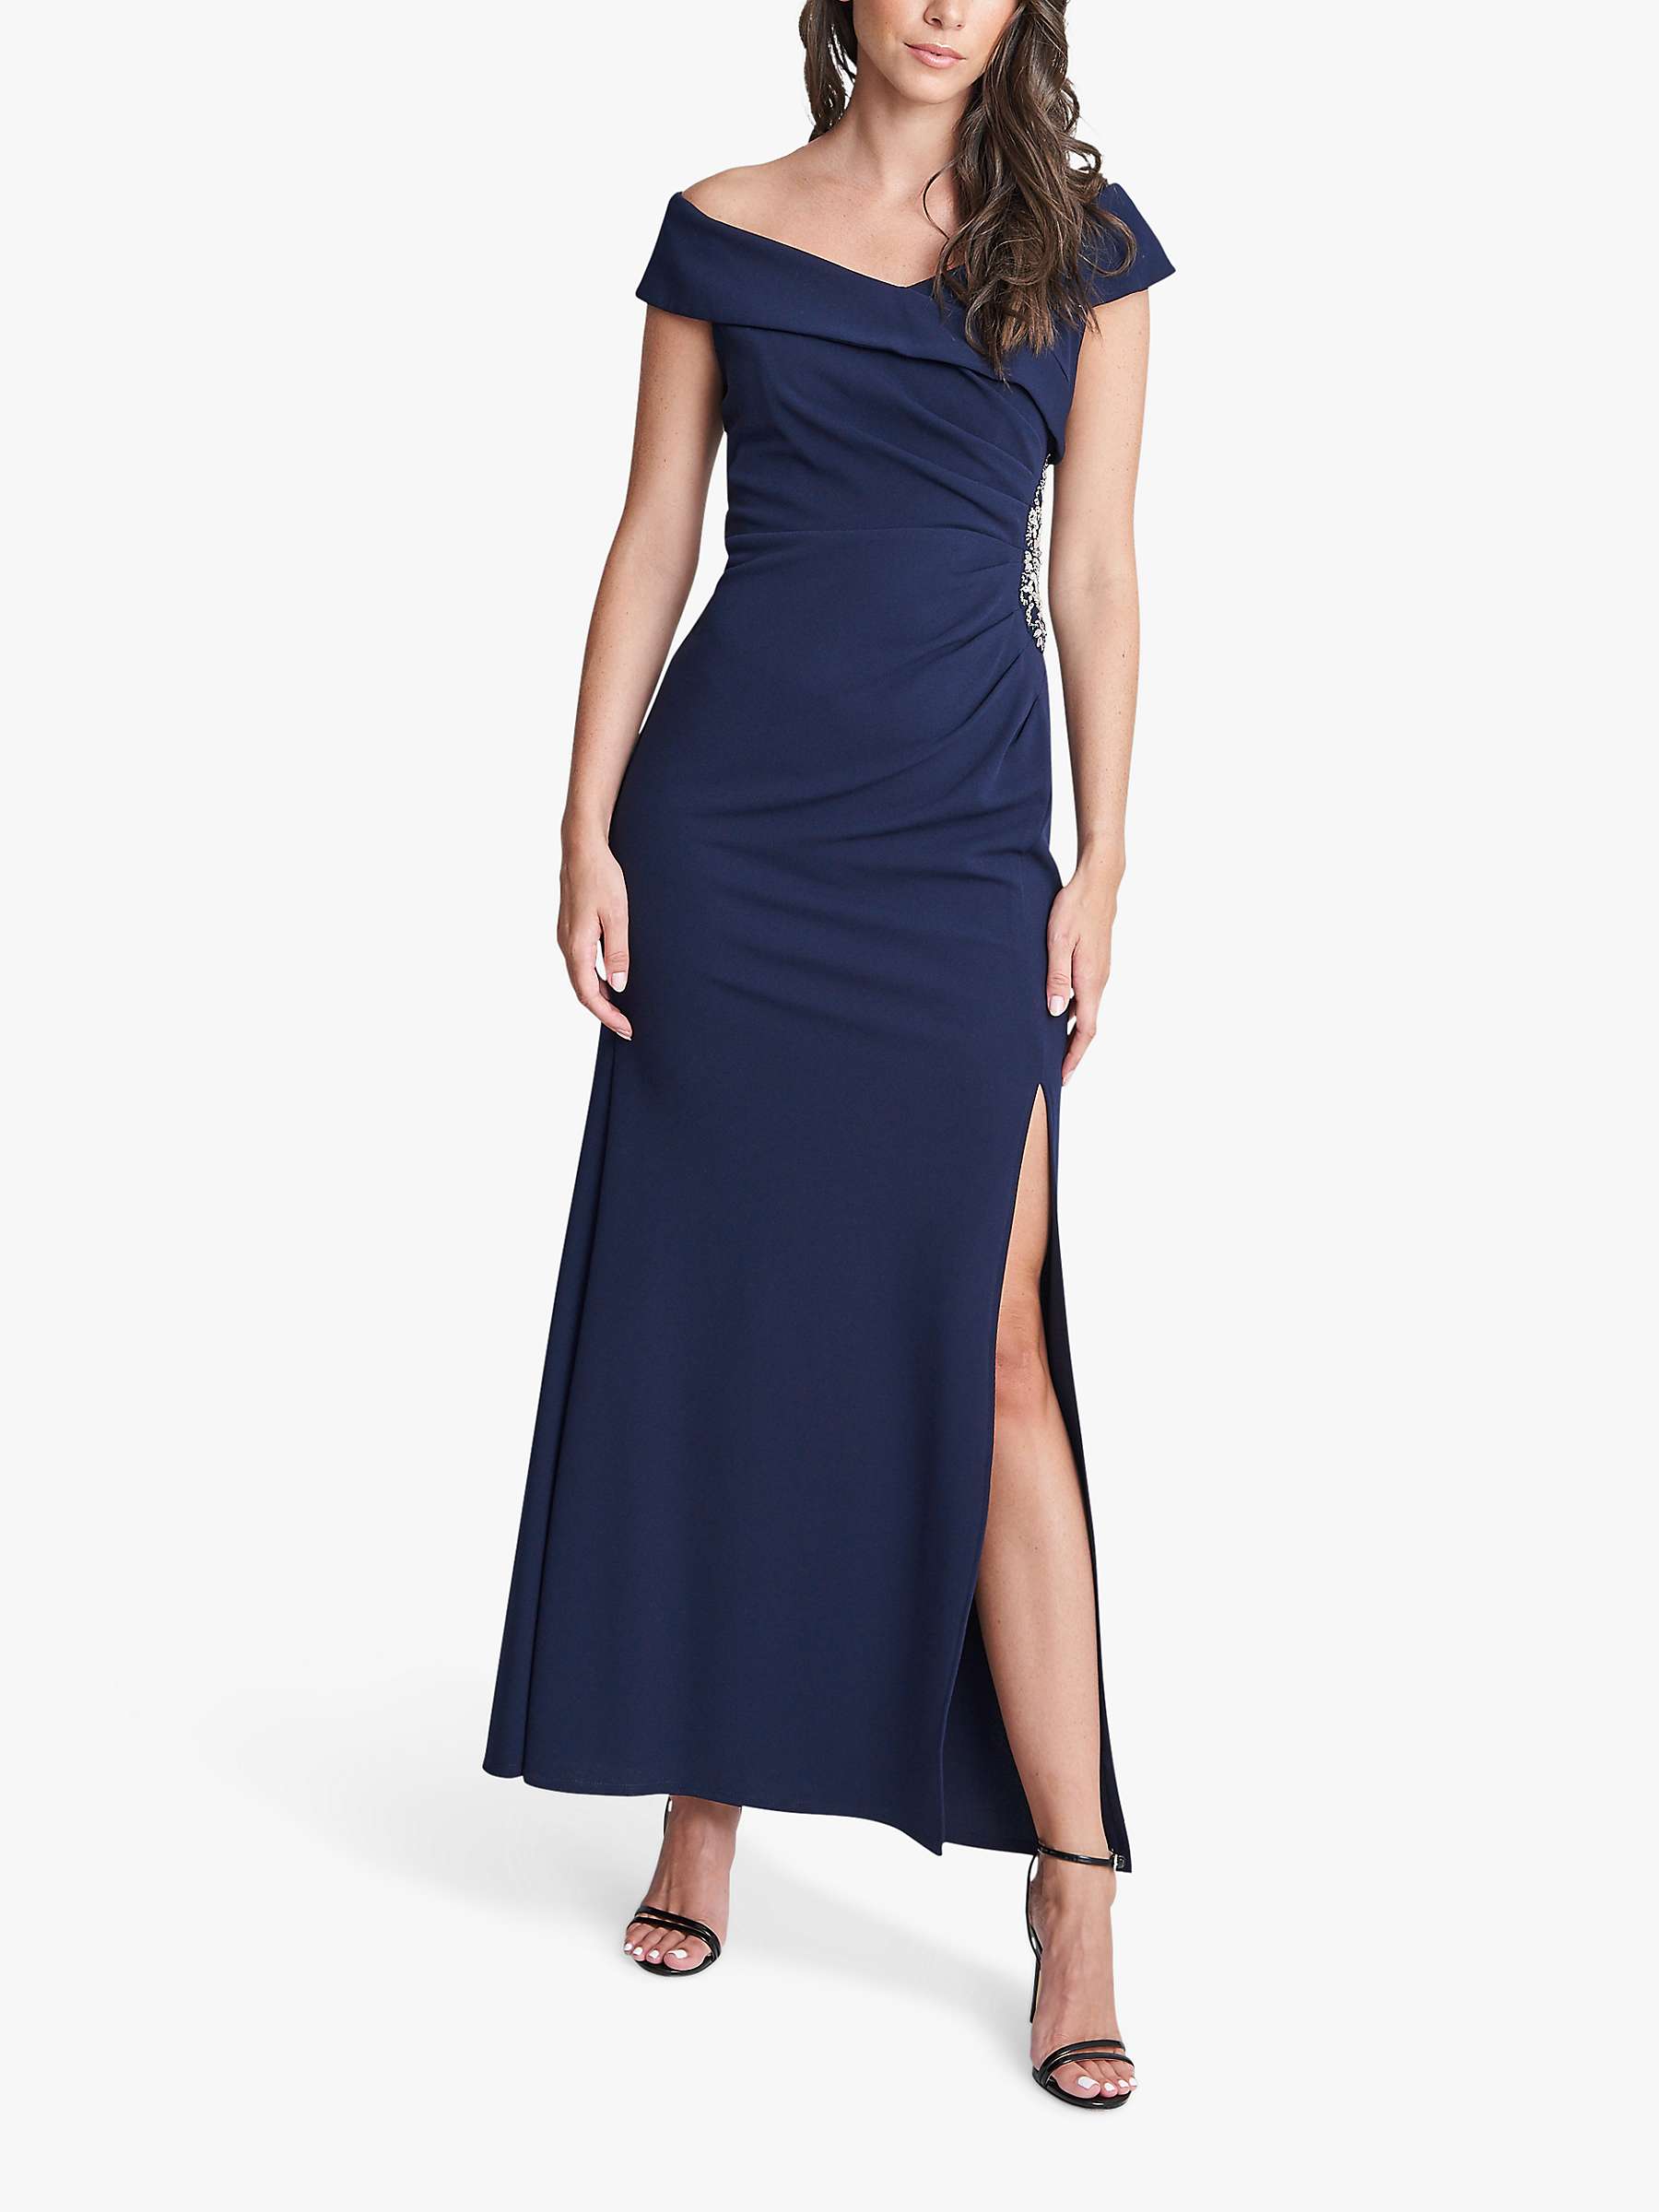 Buy Gina Bacconi Suzanne Portrait Maxi Dress, Navy Online at johnlewis.com